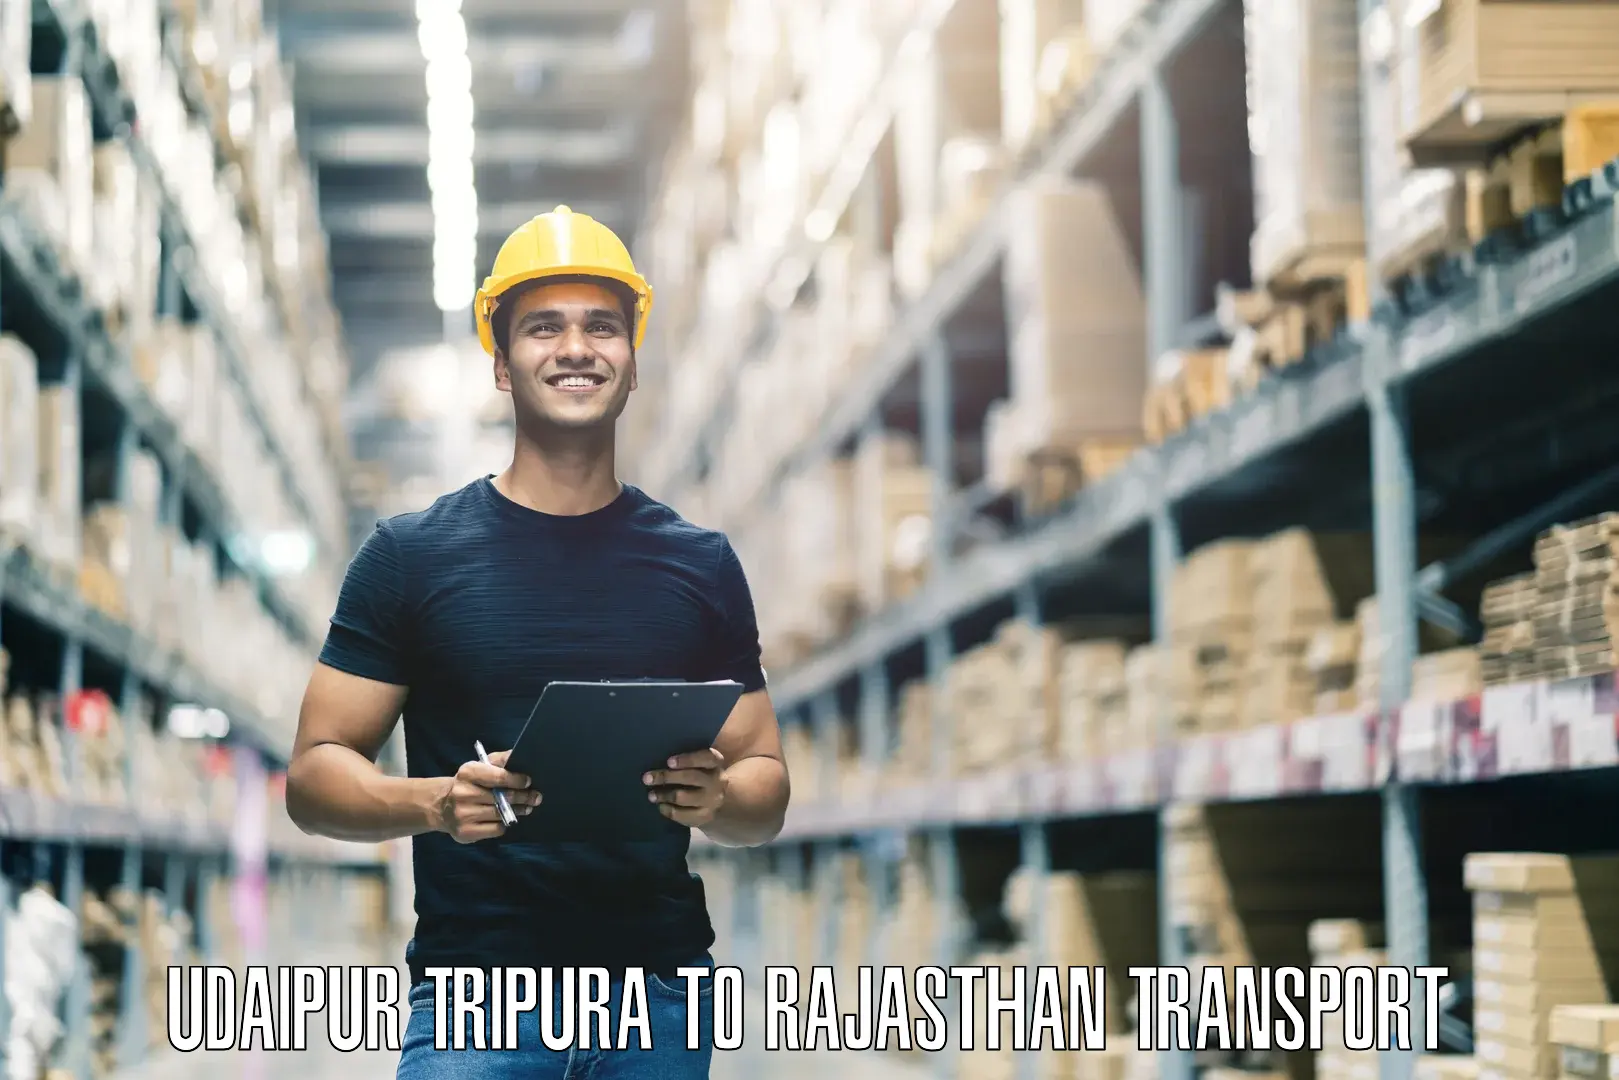 Goods delivery service Udaipur Tripura to Srimadhopur